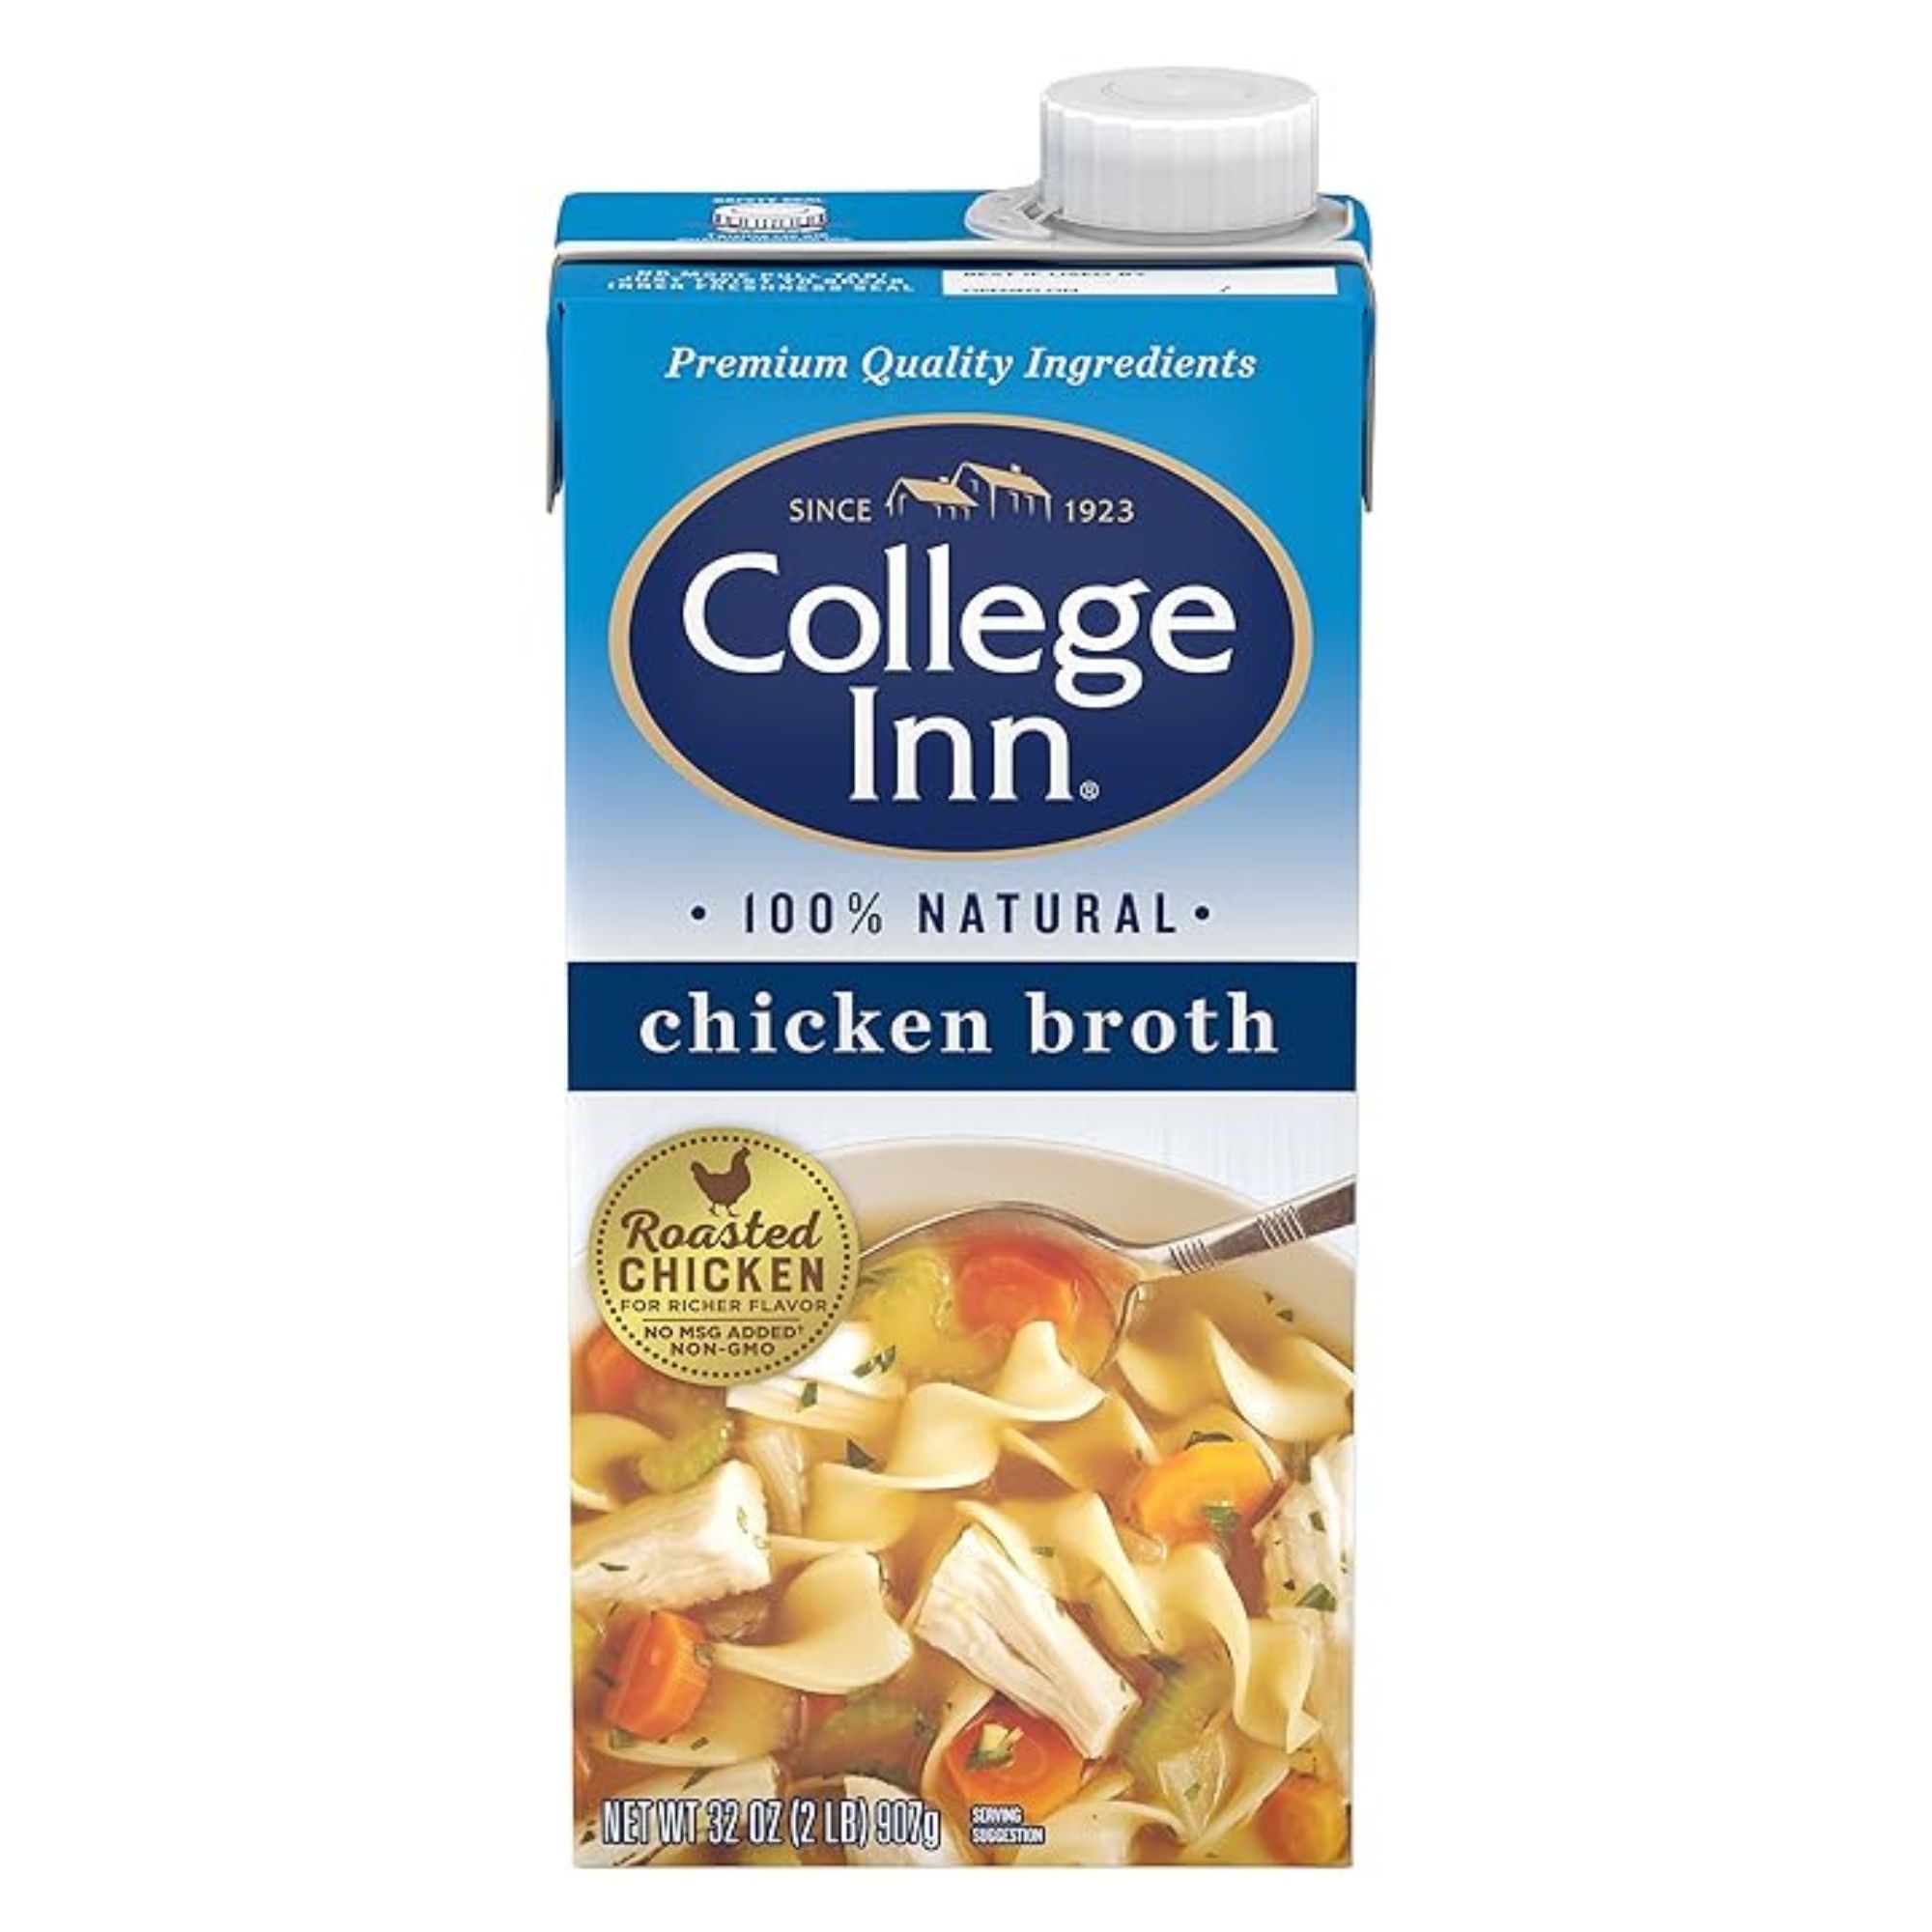 The 10 Best Store-Bought Chicken Broth Brands 10